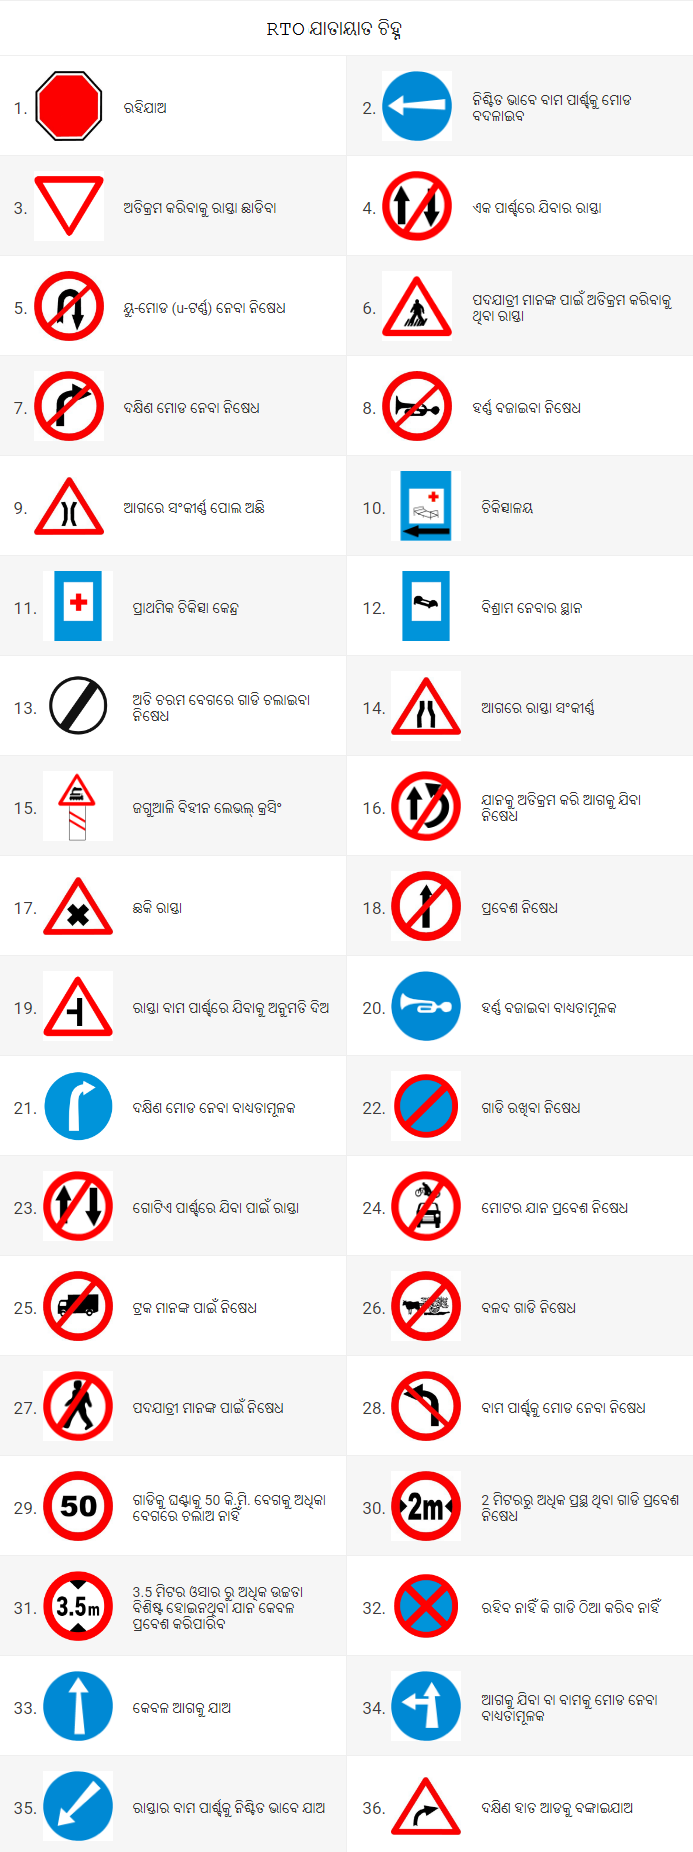 Traffic signs in Odia